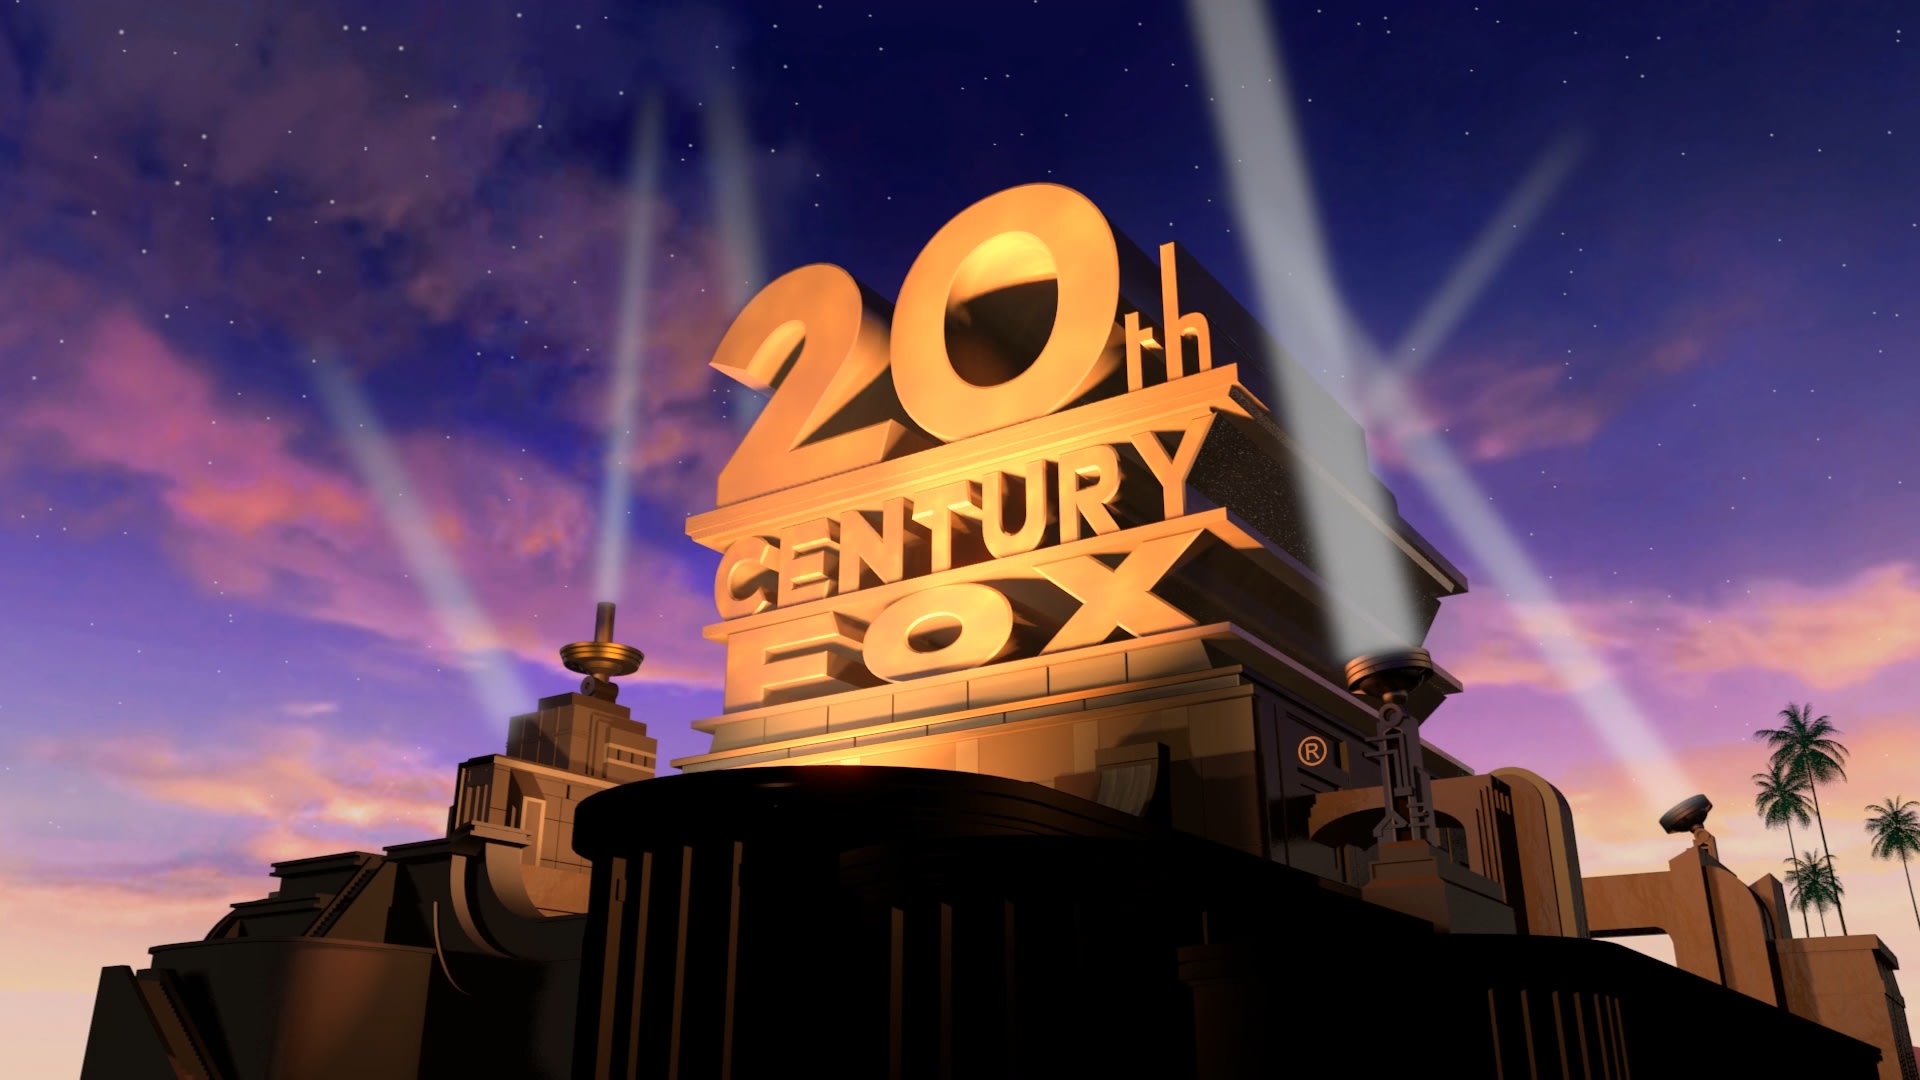 Make a 20th century fox intro with your text by Designosaur187